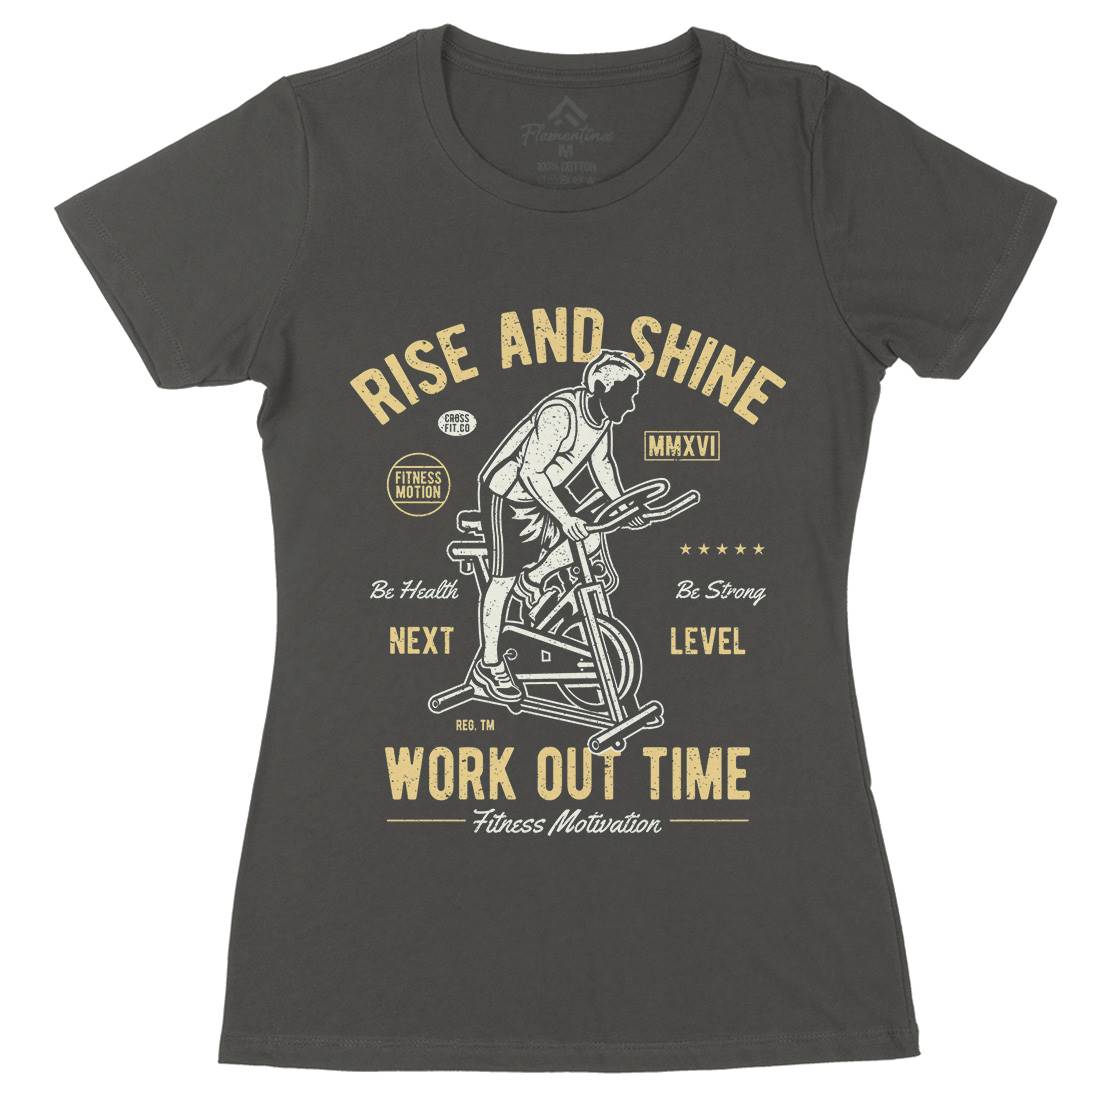 Work Out Time Womens Organic Crew Neck T-Shirt Gym A199